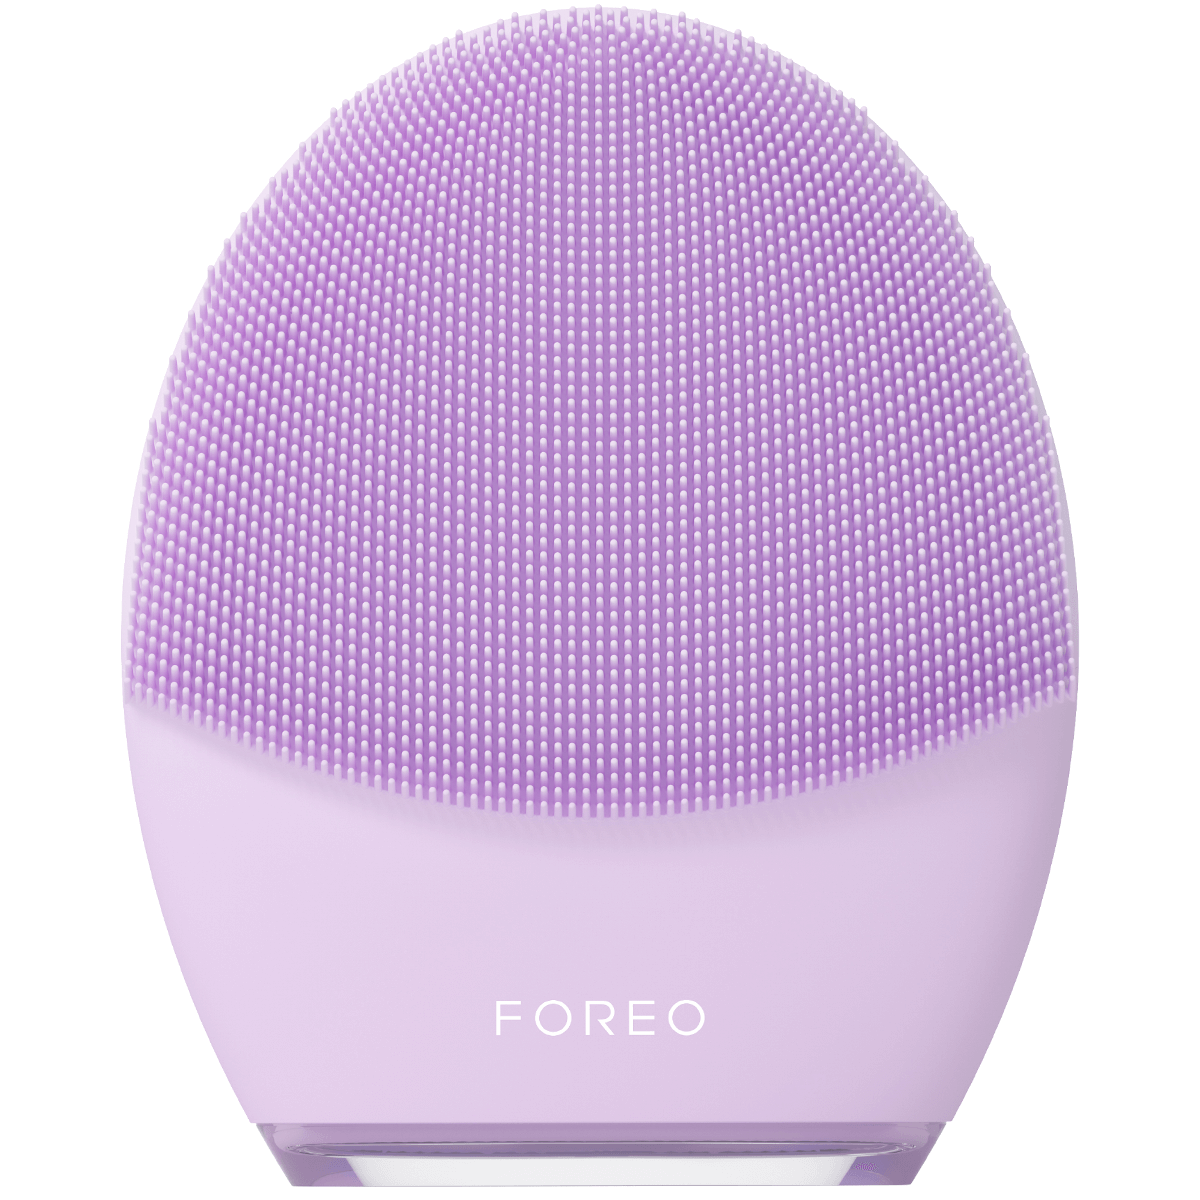 FOREO LUNA 4 | Device & Cleansing CurrentBody US Facial Smart Firming